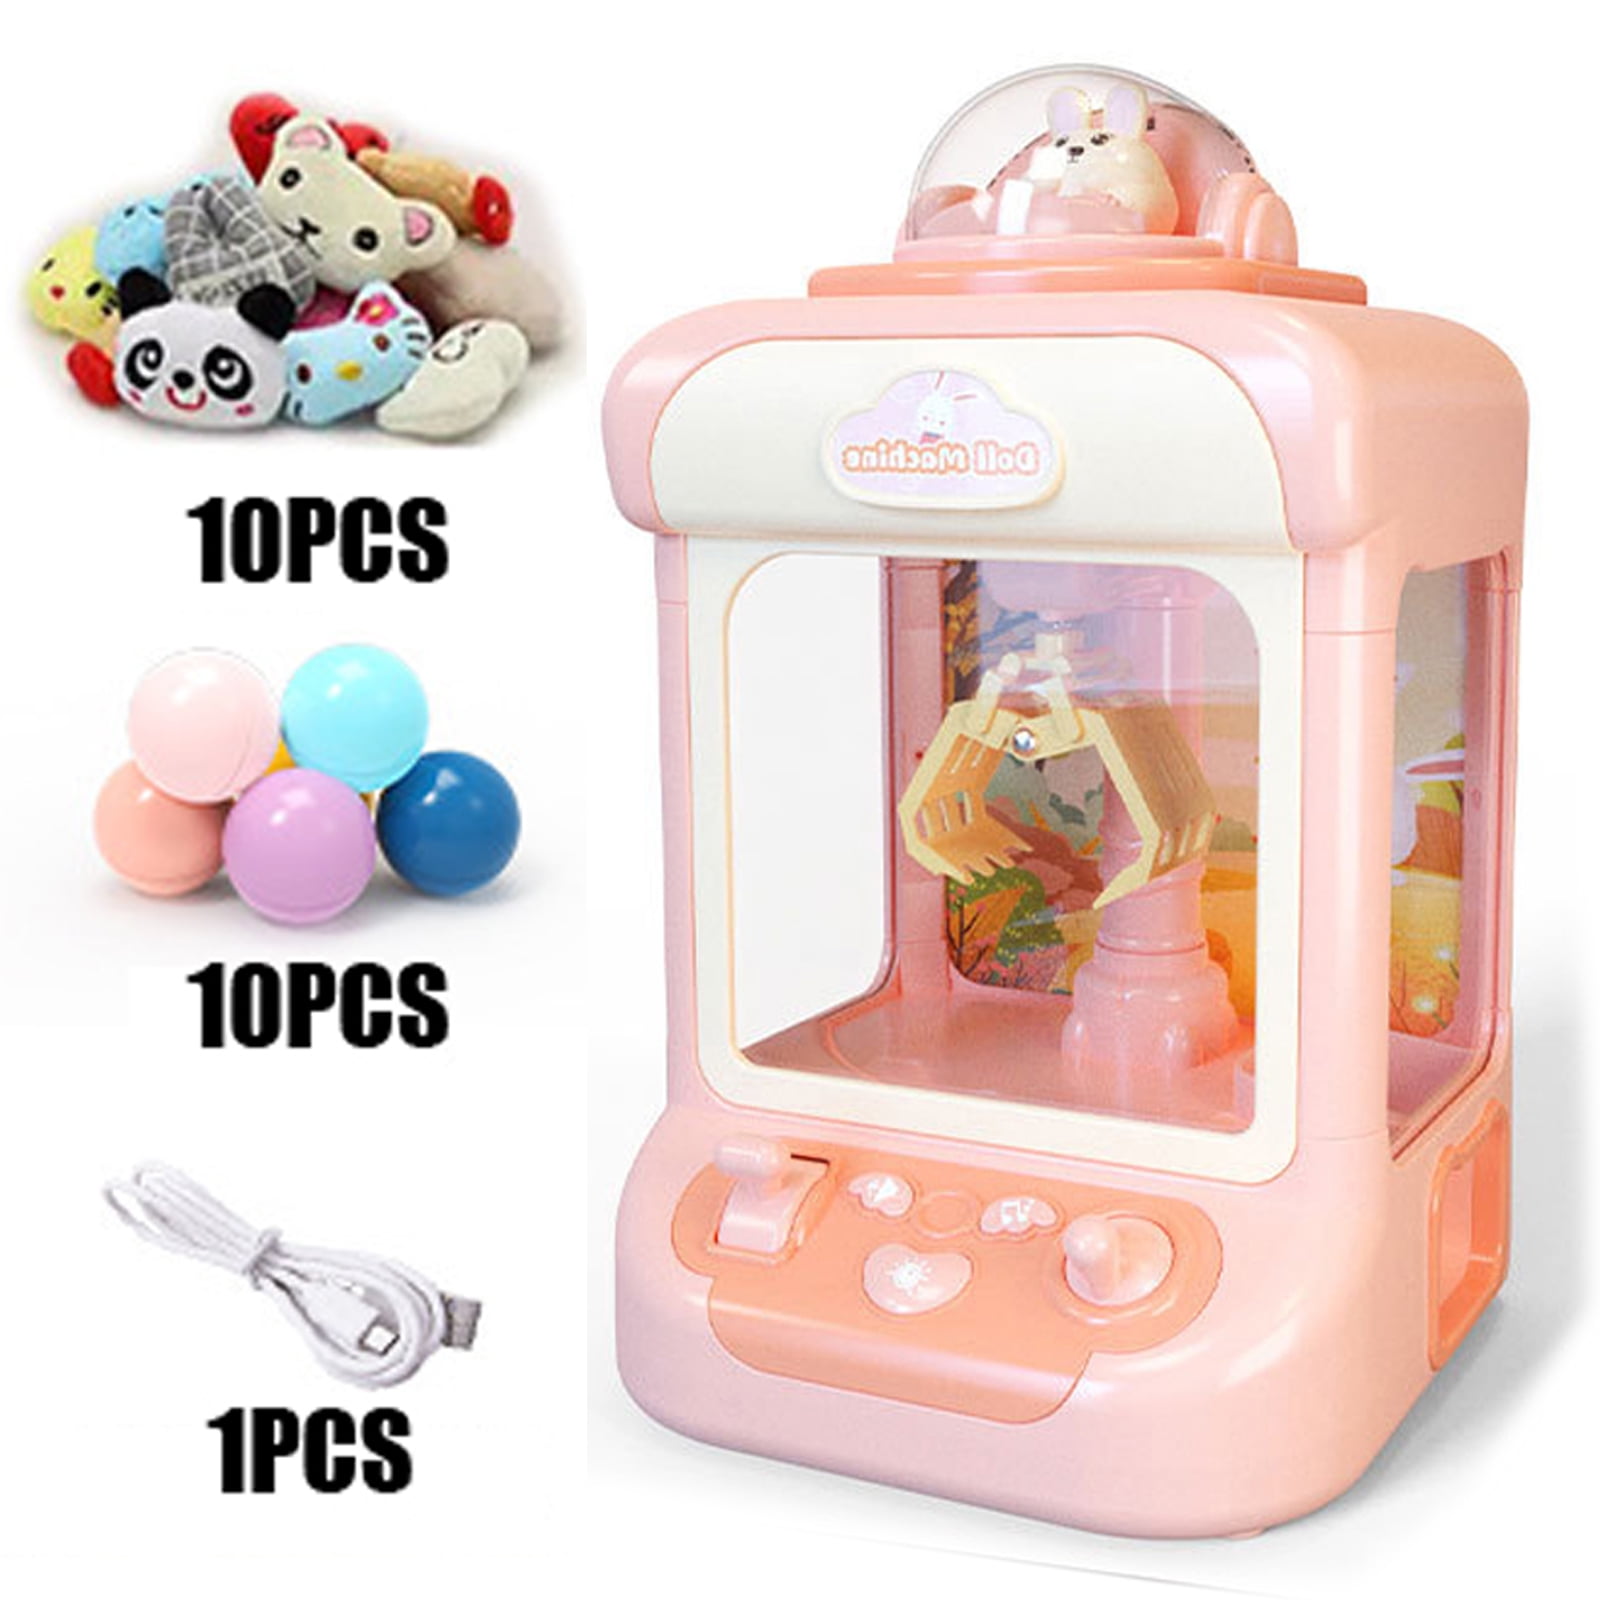 Candy Mini Claw Machine for KidsUnicorn Toys Christmas Best Gifts Id